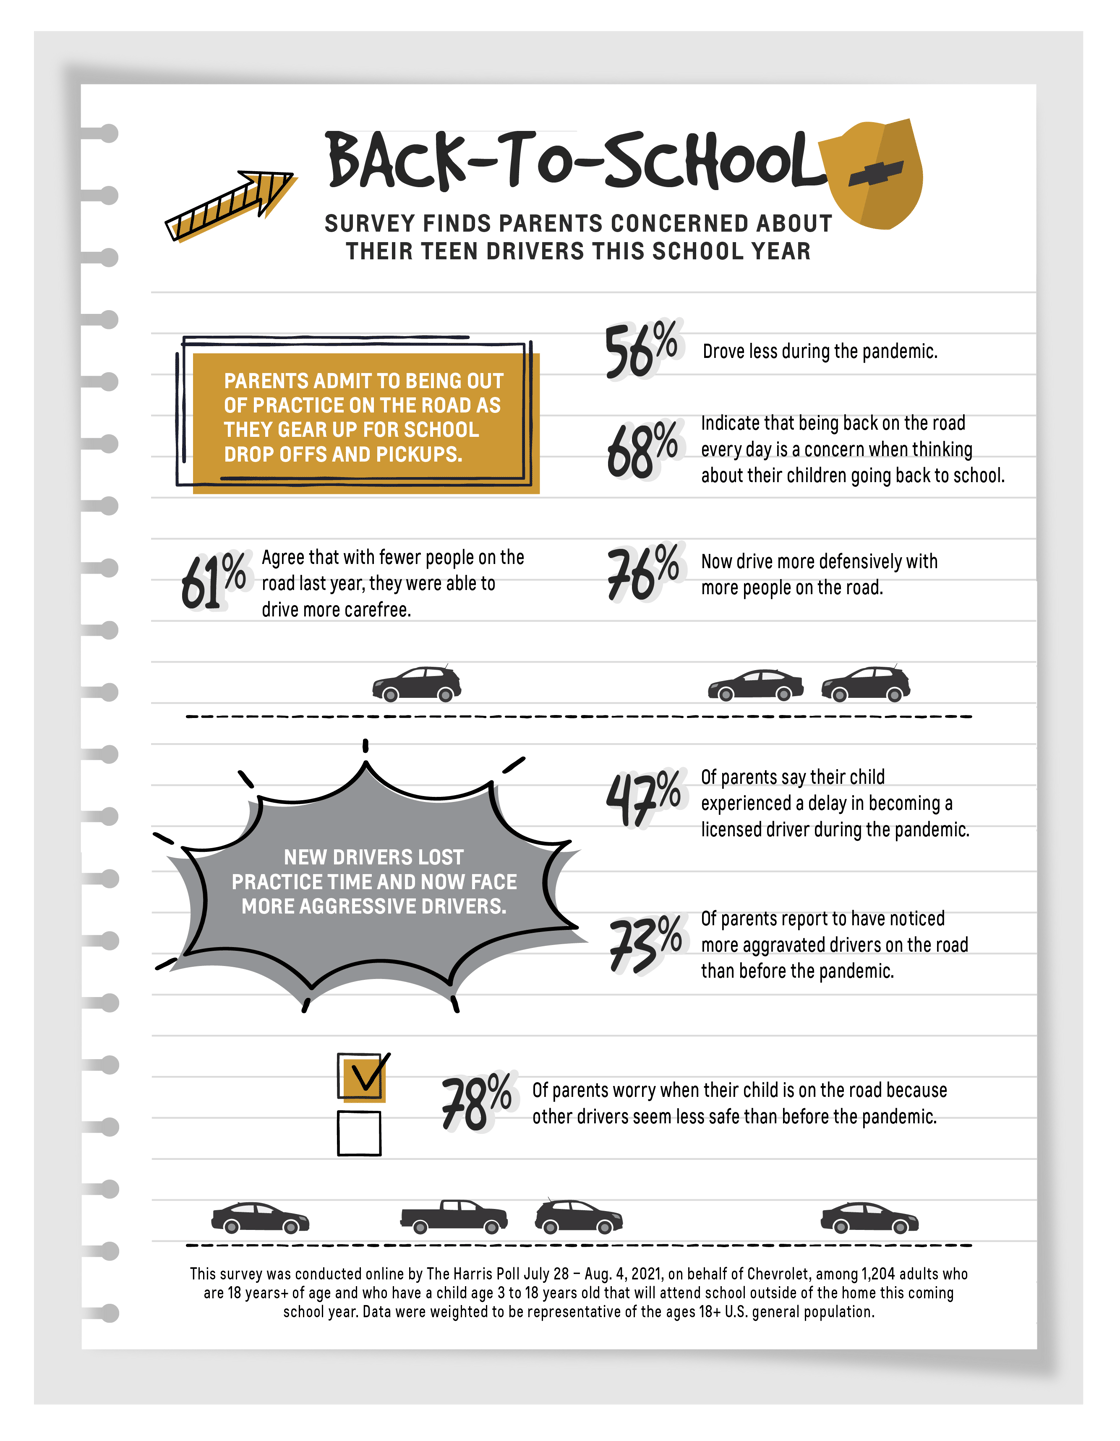 Chevy_BTS_Infographic_English-1